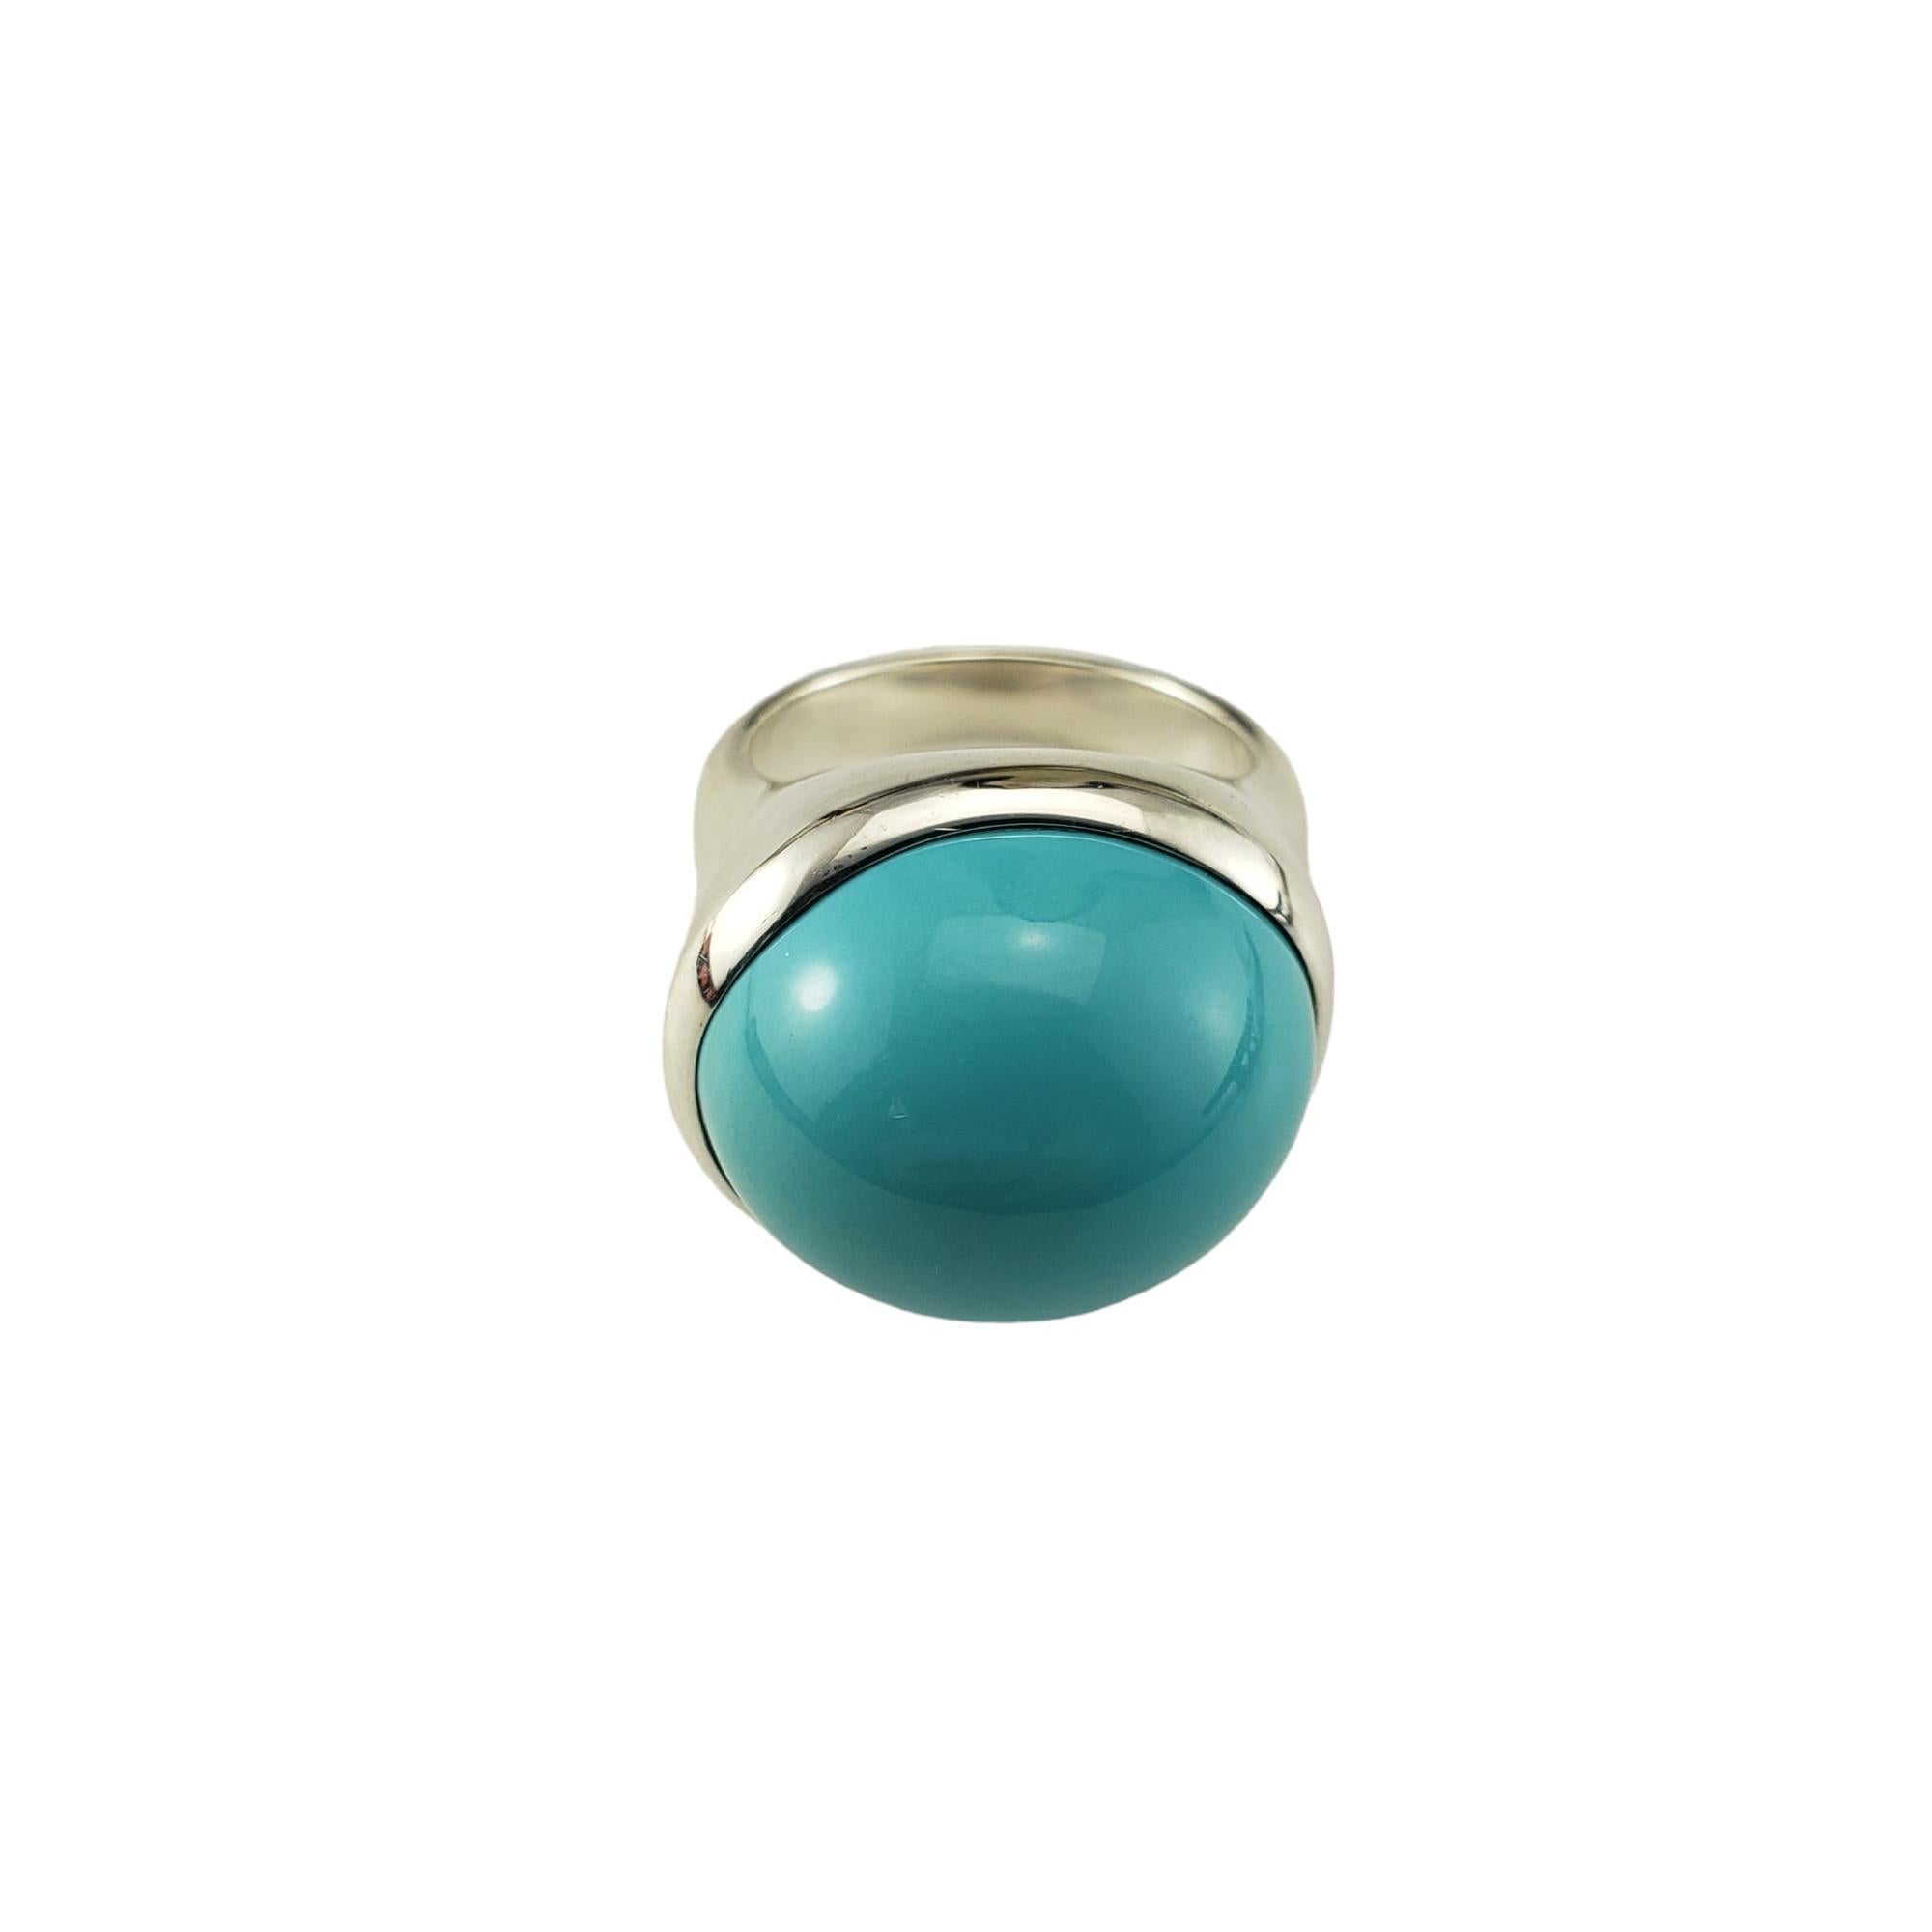 Tiffany & Co. Elsa Peretti Sterling Silver Turquoise Ring Size 8

This stunning ring features one cabochon turquoise stone (21 mm x 16 mm) set in classic sterling silver.  By Elsa Peretti for Tiffany & Co.  

Shank: 4 mm.

Ring Size: 8

Hallmark: